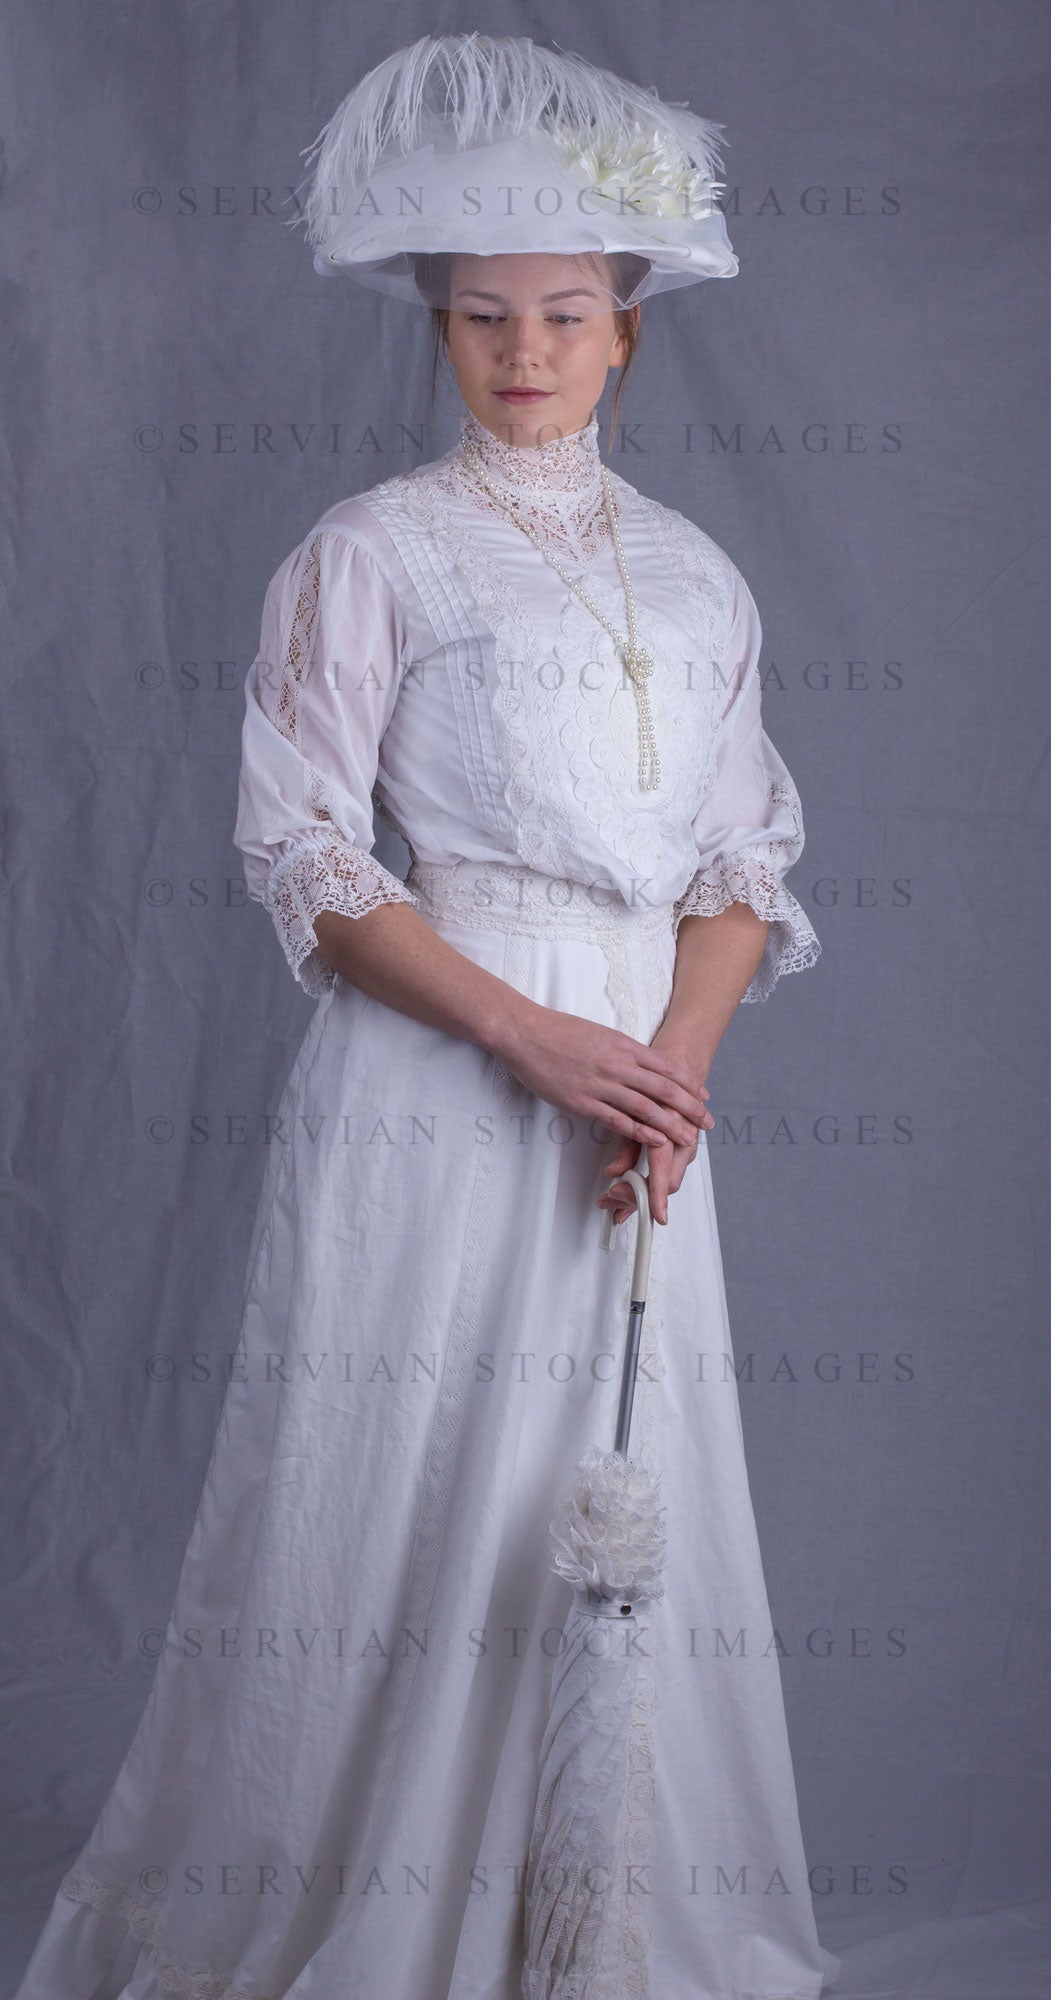 Edwardian woman in a white lace blouse and skirt with a pearl necklace (Tayla 0075)